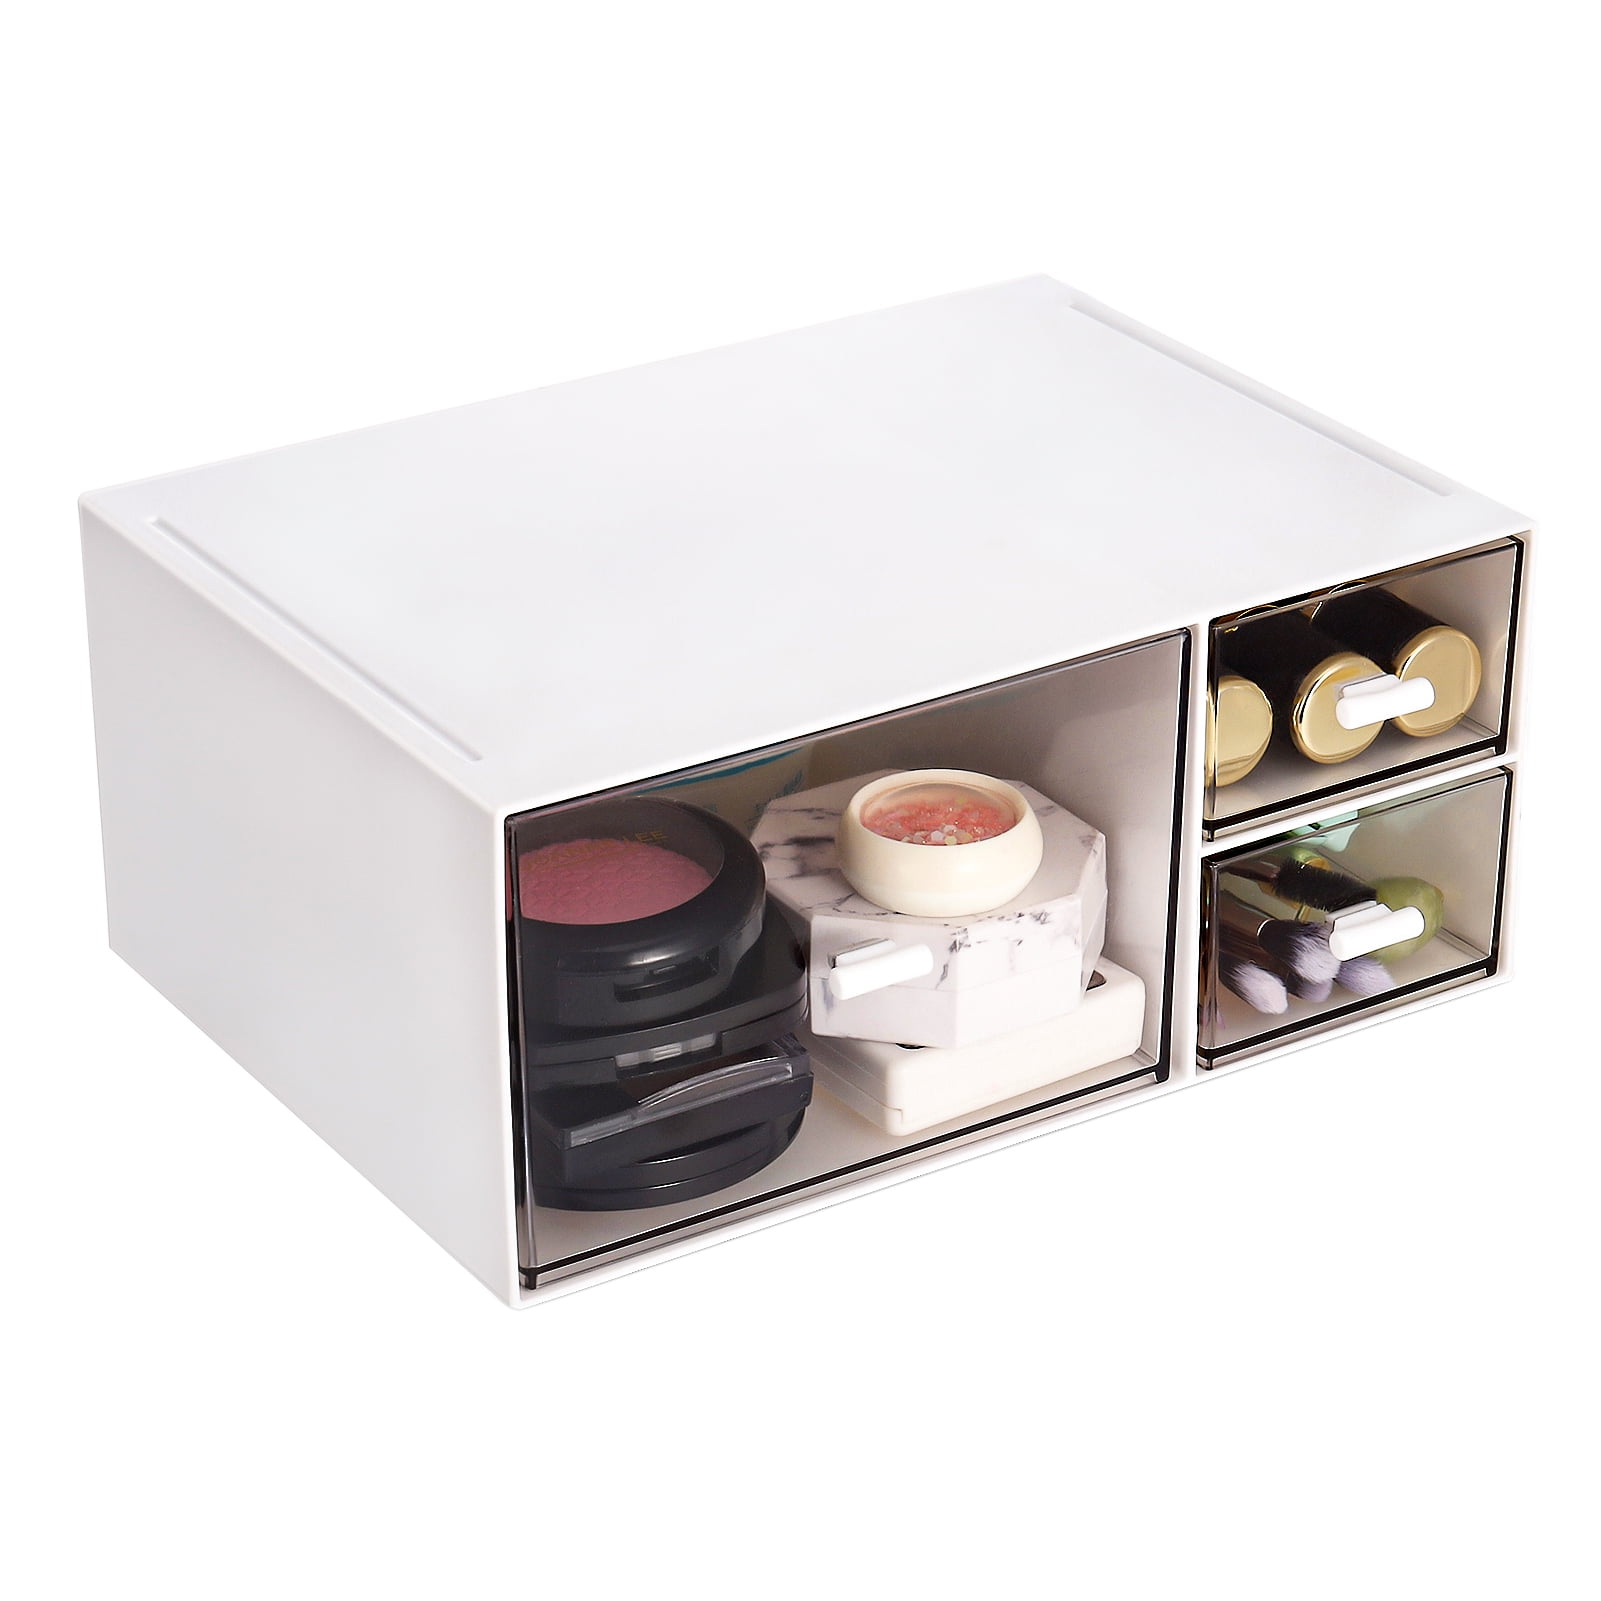 New Deflecto Stackable Caddy Organizer w/ S, M & L Containers, White Caddy, Clear Containers,Each